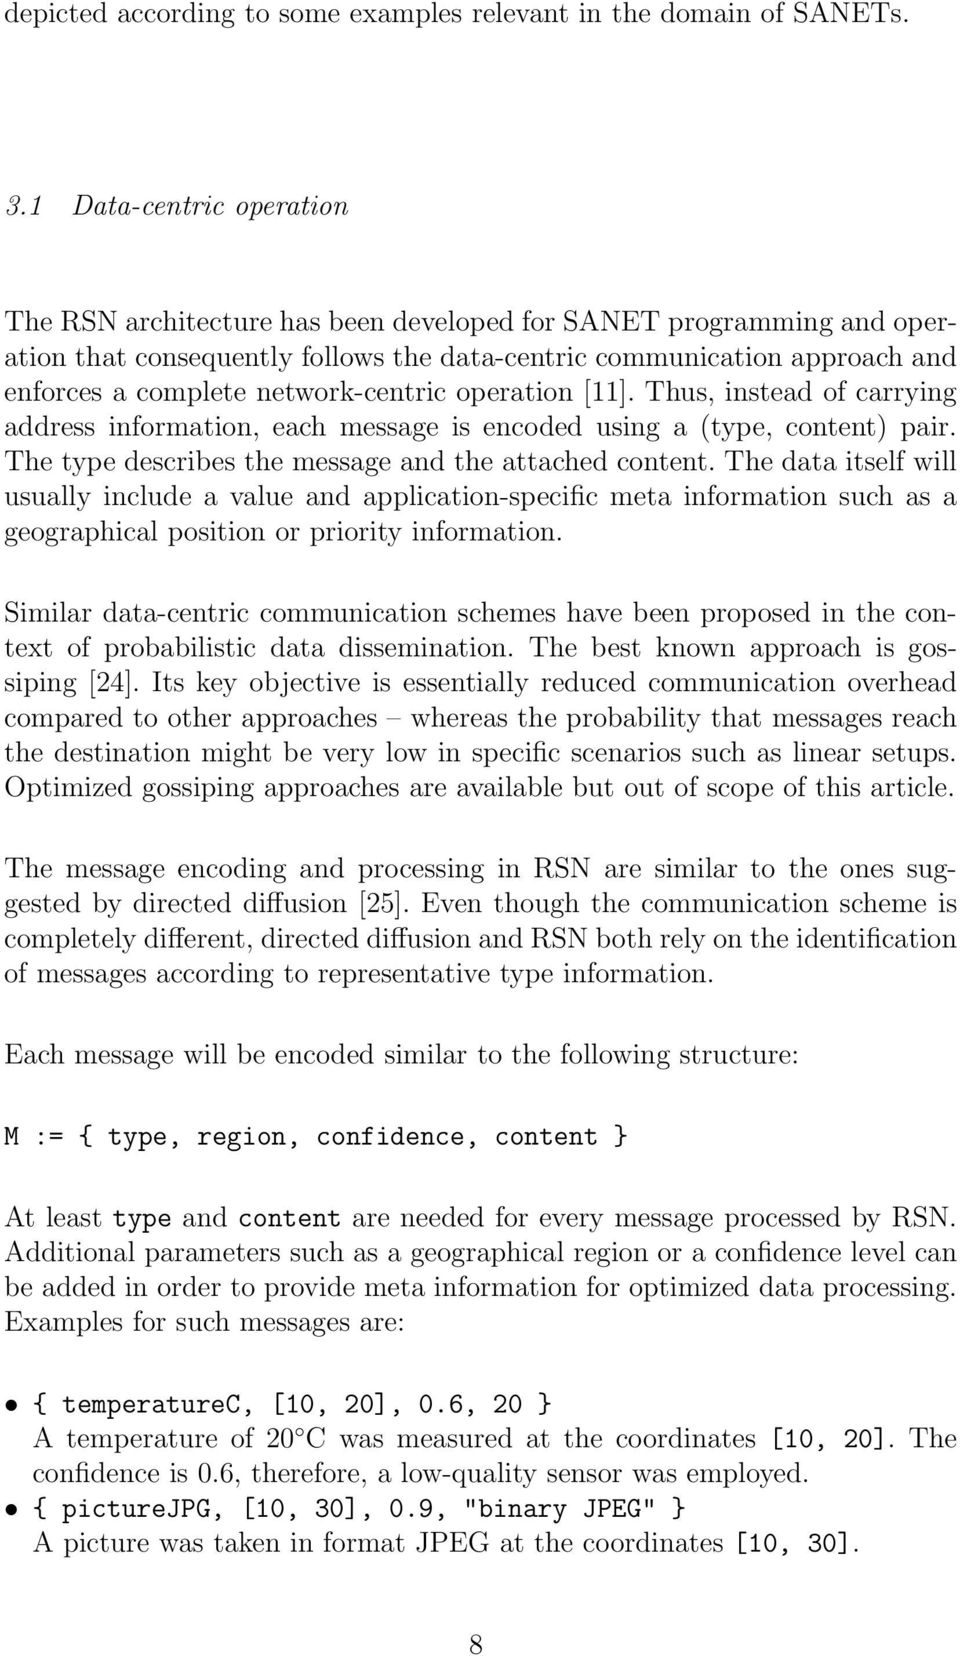 network-centric operation [11]. Thus, instead of carrying address information, each message is encoded using a (type, content) pair. The type describes the message and the attached content.